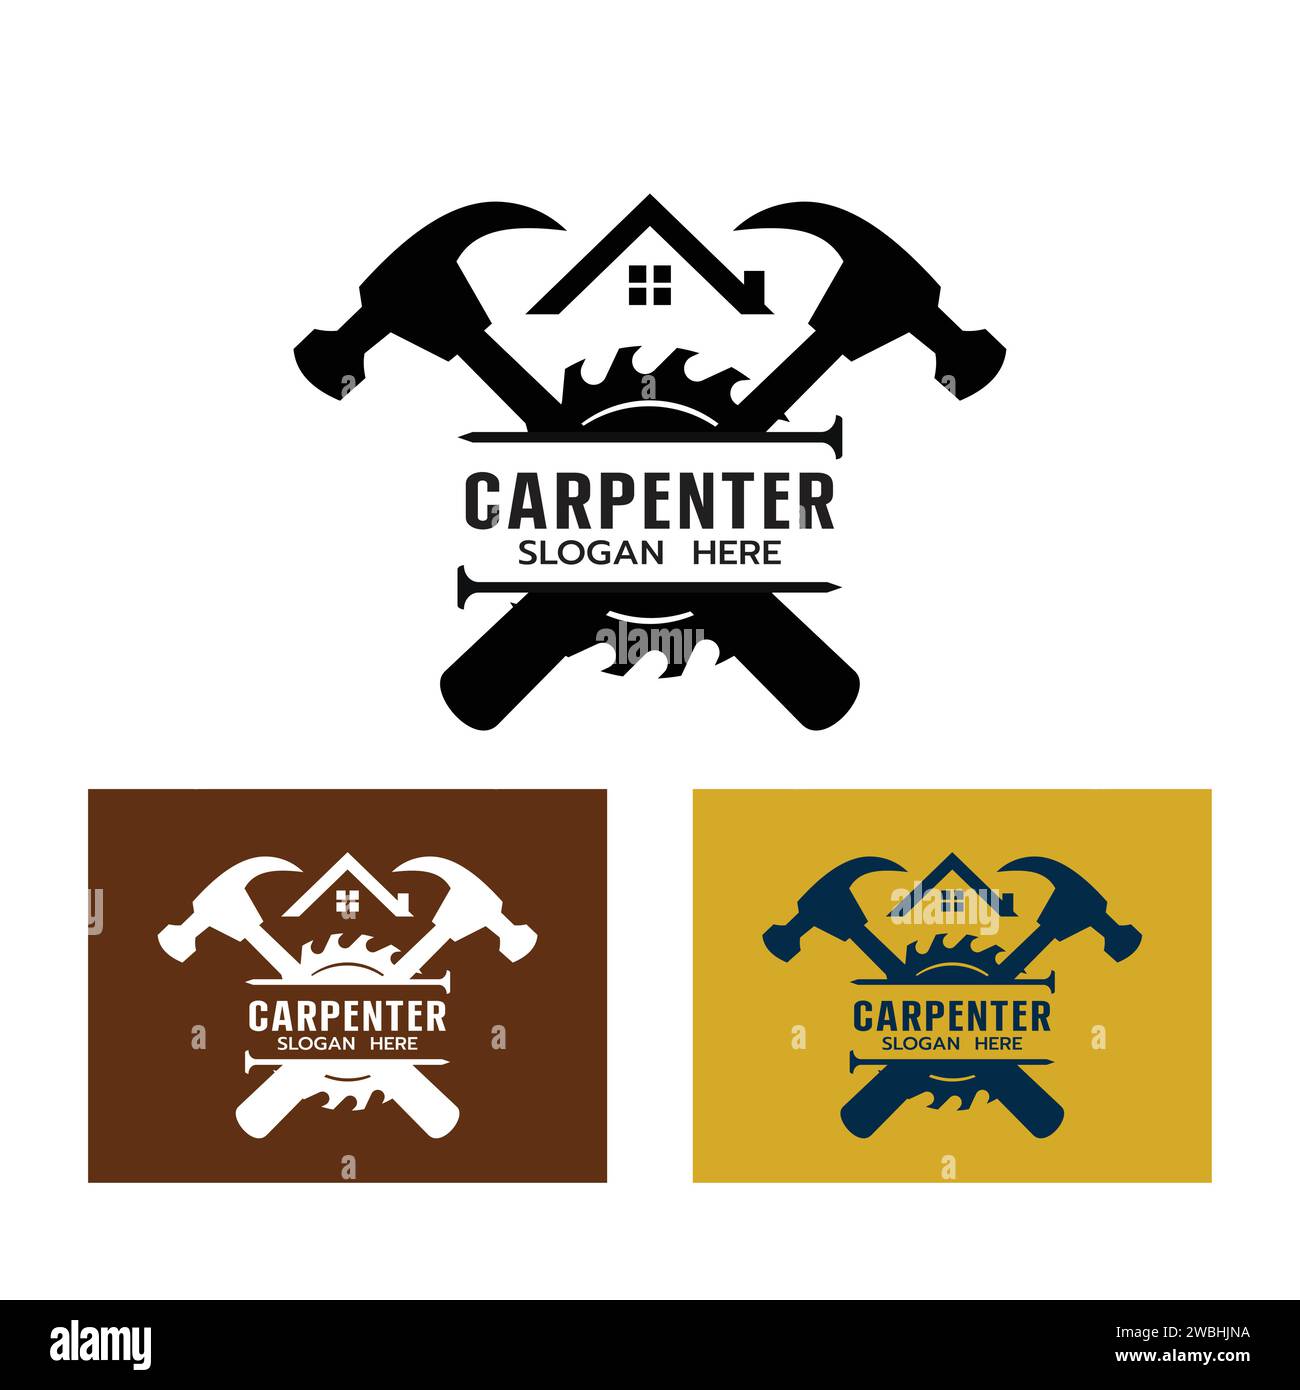 Carpenter Logo template with House,Saw, Hammer Construction Building Carpentry logo concept on white background Vector illustration Stock Vector